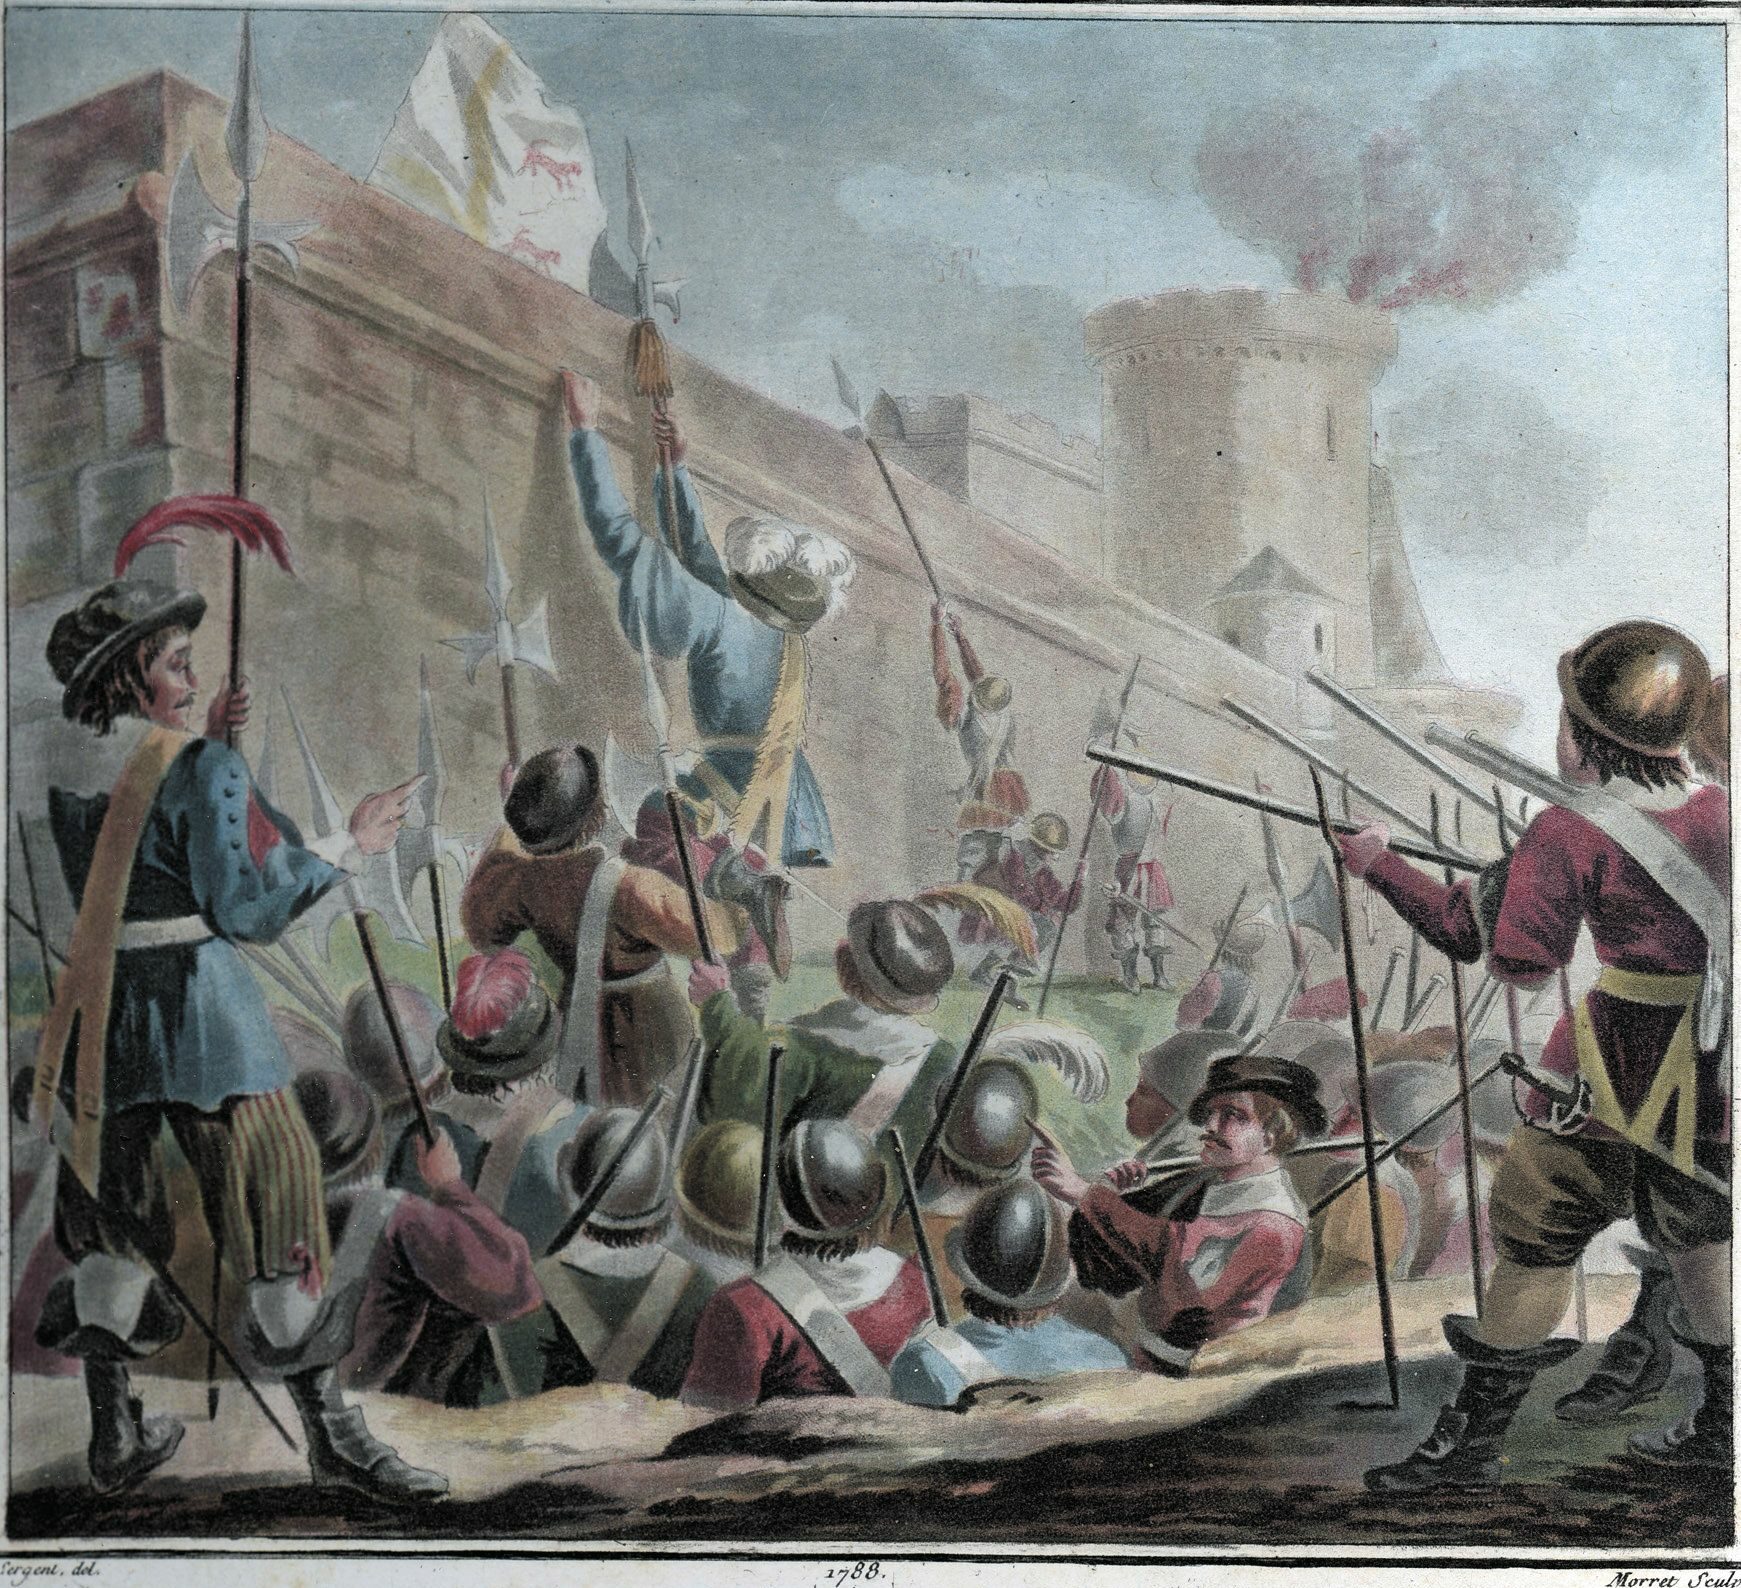 Called “the Hammer of the Huguenots,” Blaise de Monluc led the king’s Catholic forces in France’s religious wars. Here he attacks Boulogne-sur-Mer.